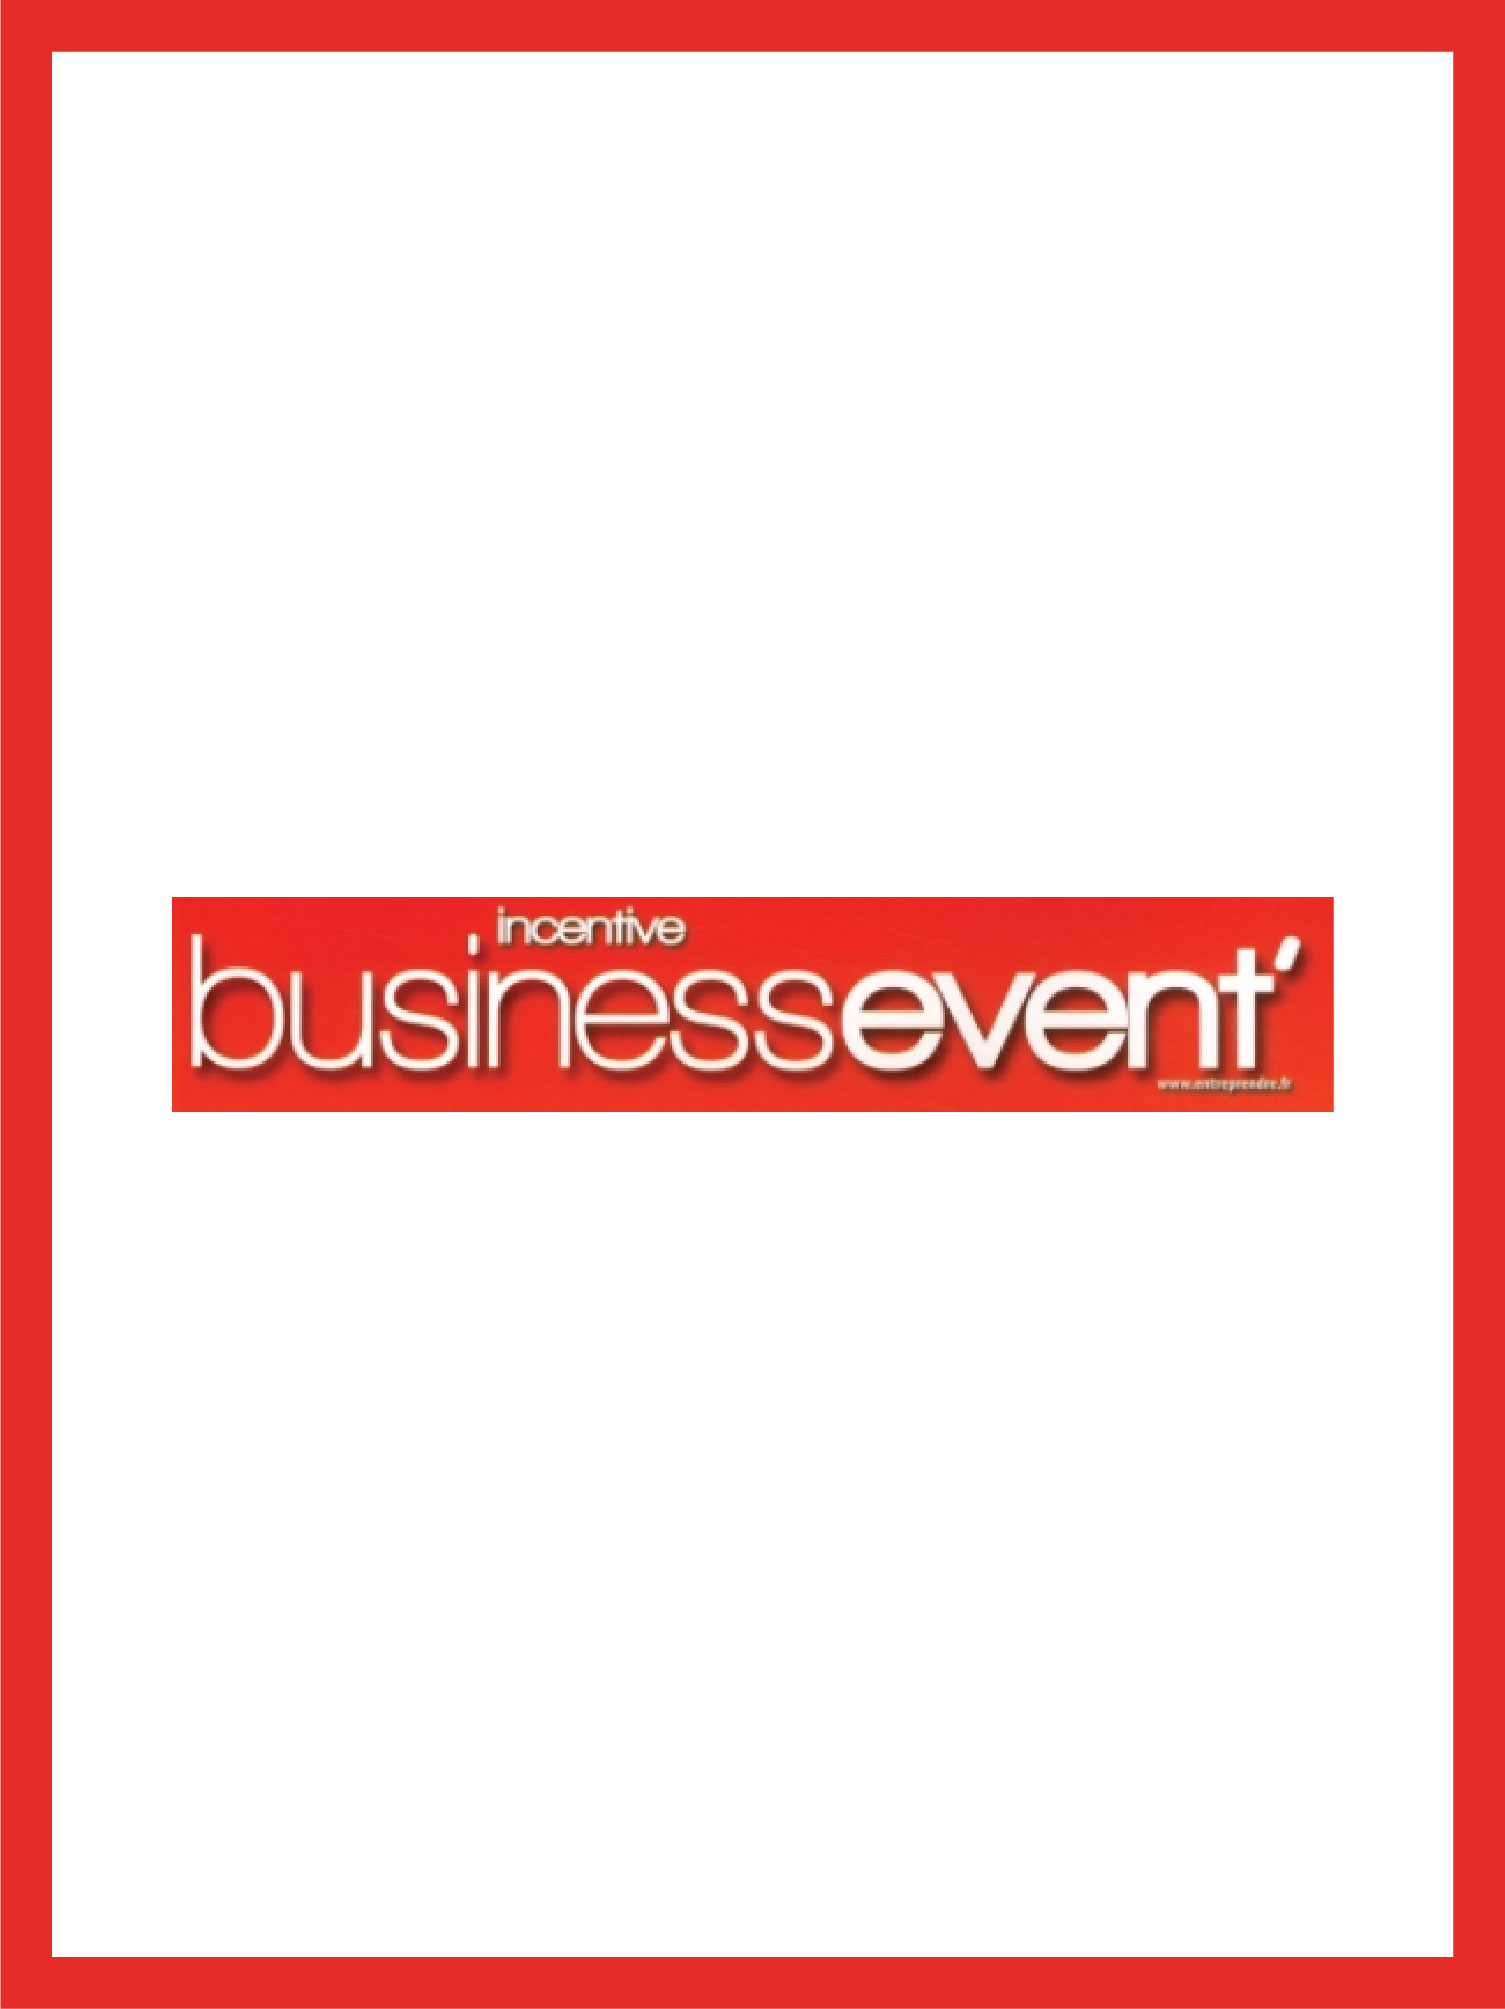 logo of the magazine business event